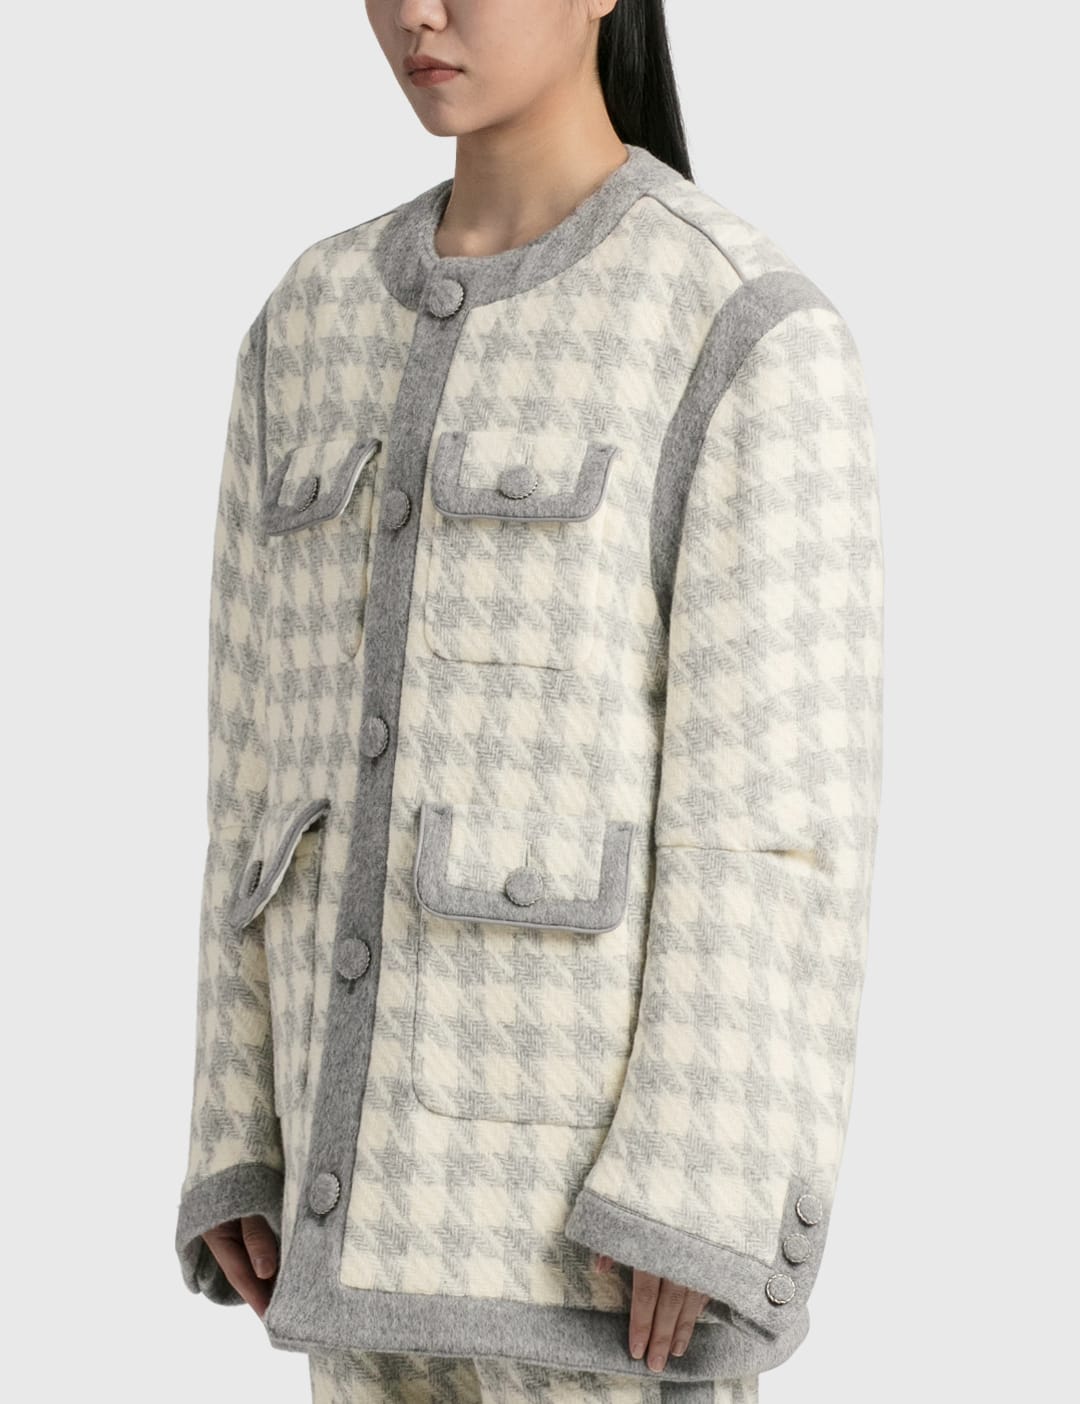 Ader Error - Beron Coat | HBX - Globally Curated Fashion and